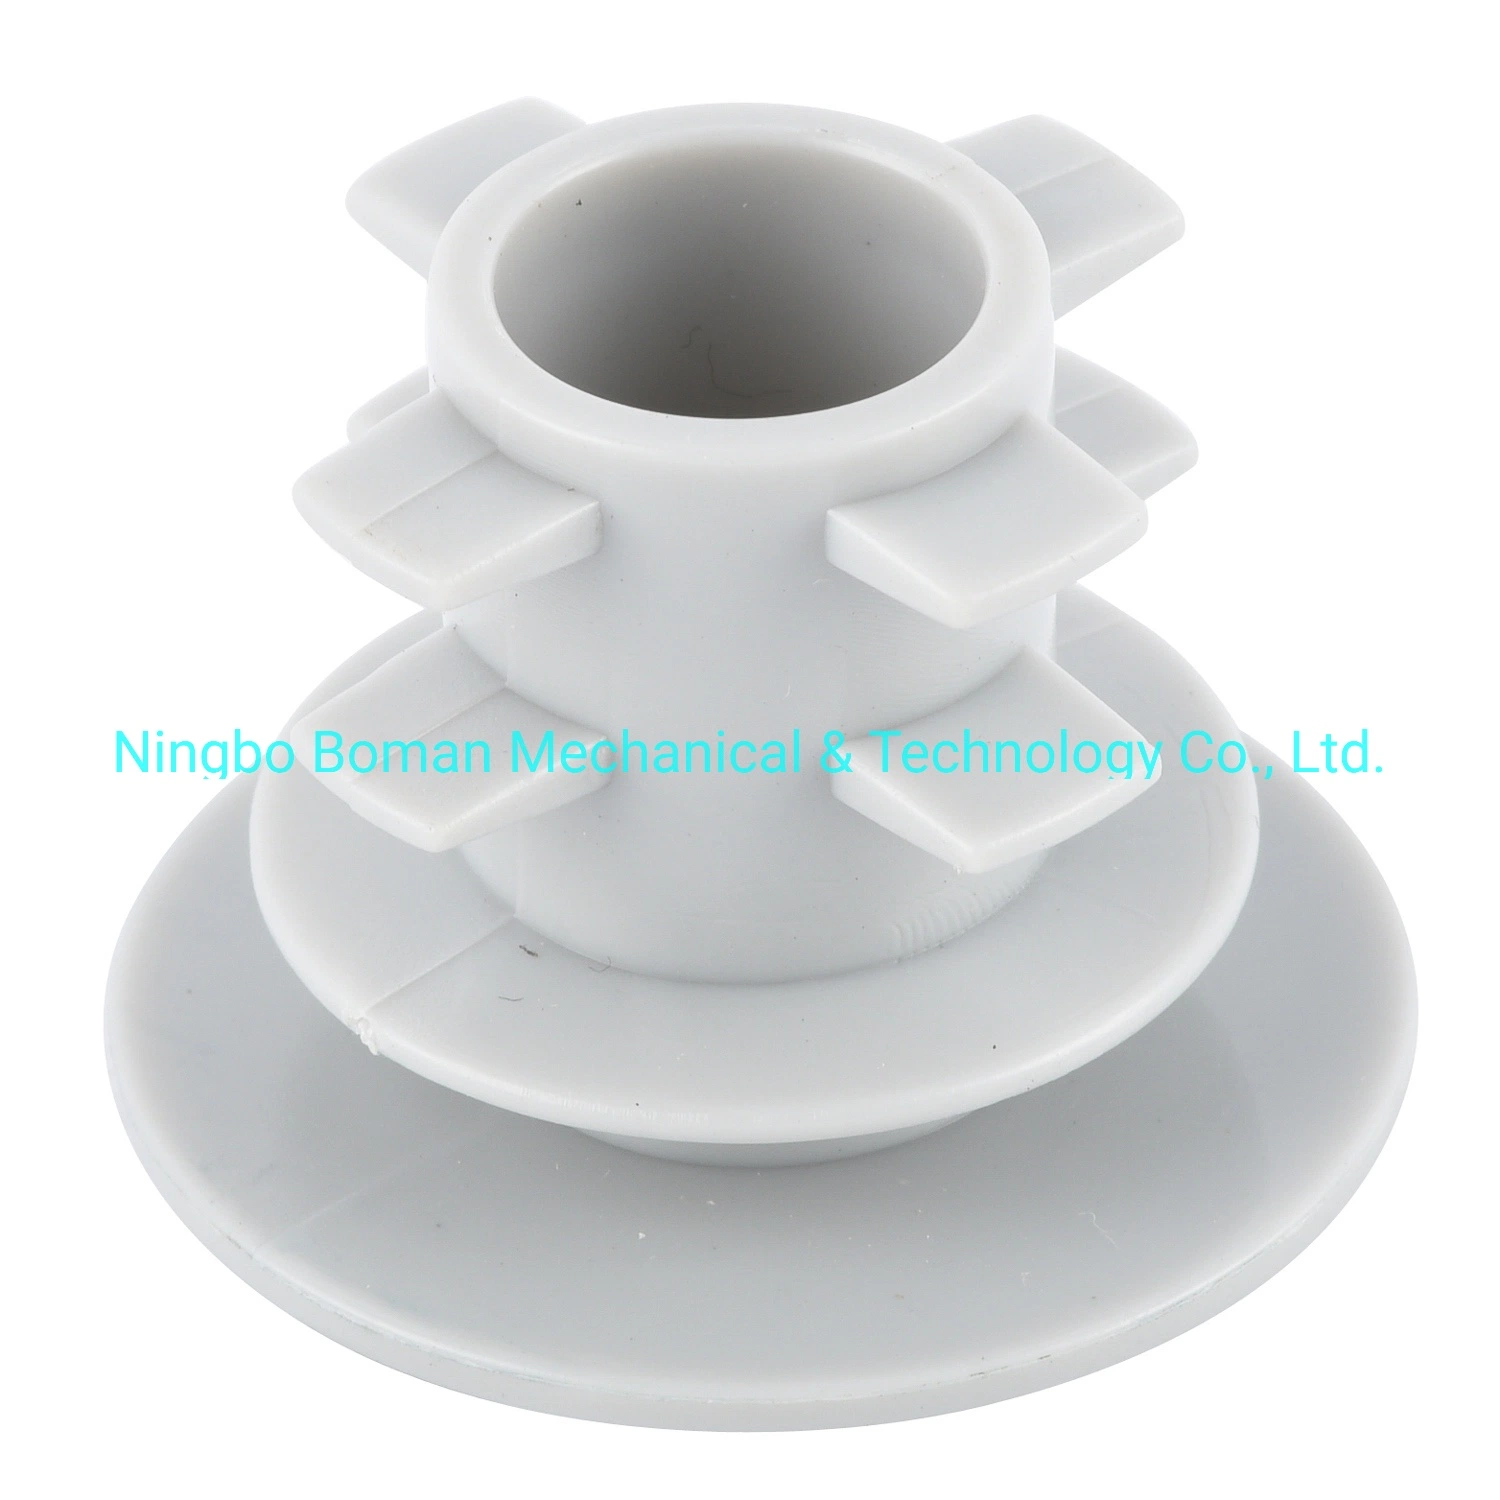 FDA Molded Silicone Rubber Products Molded Rubber Products and Plastic Products